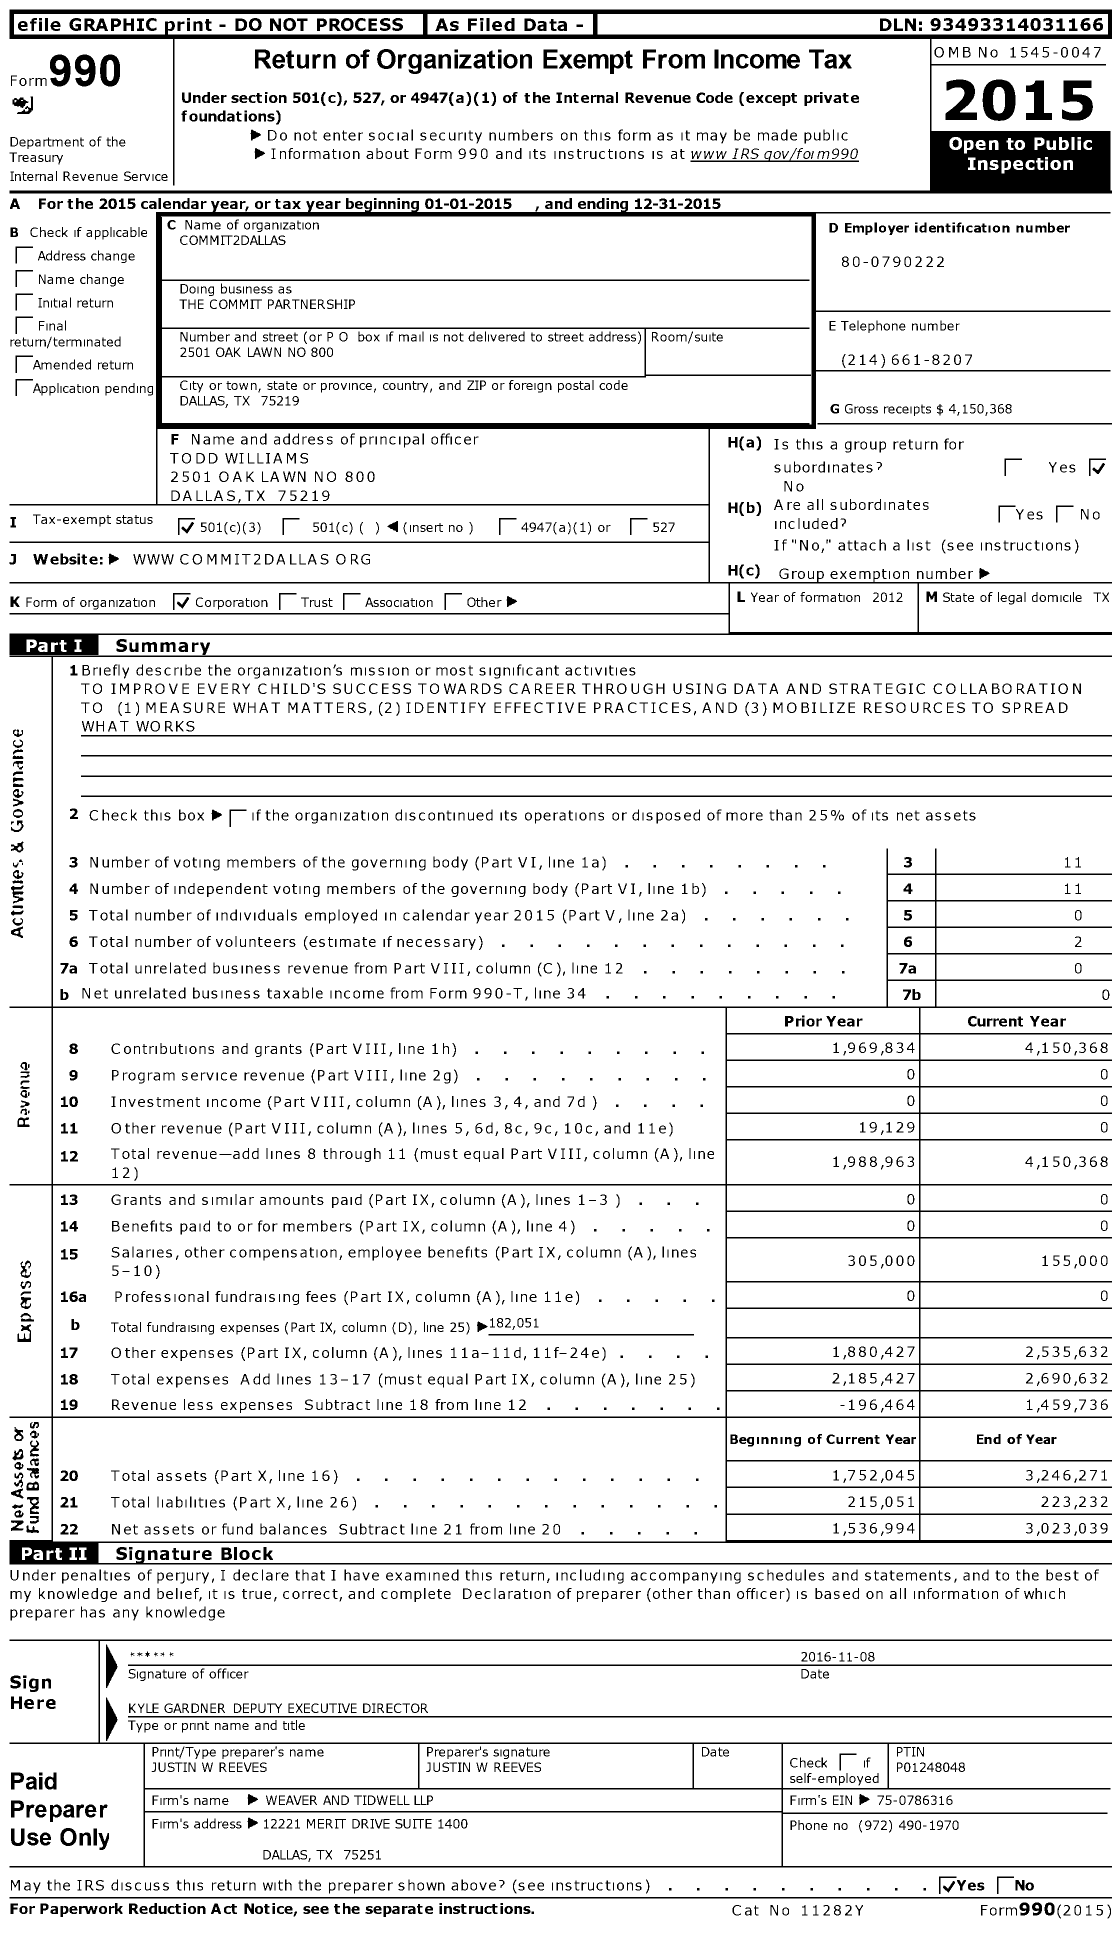 Image of first page of 2015 Form 990 for The Commit Partnership